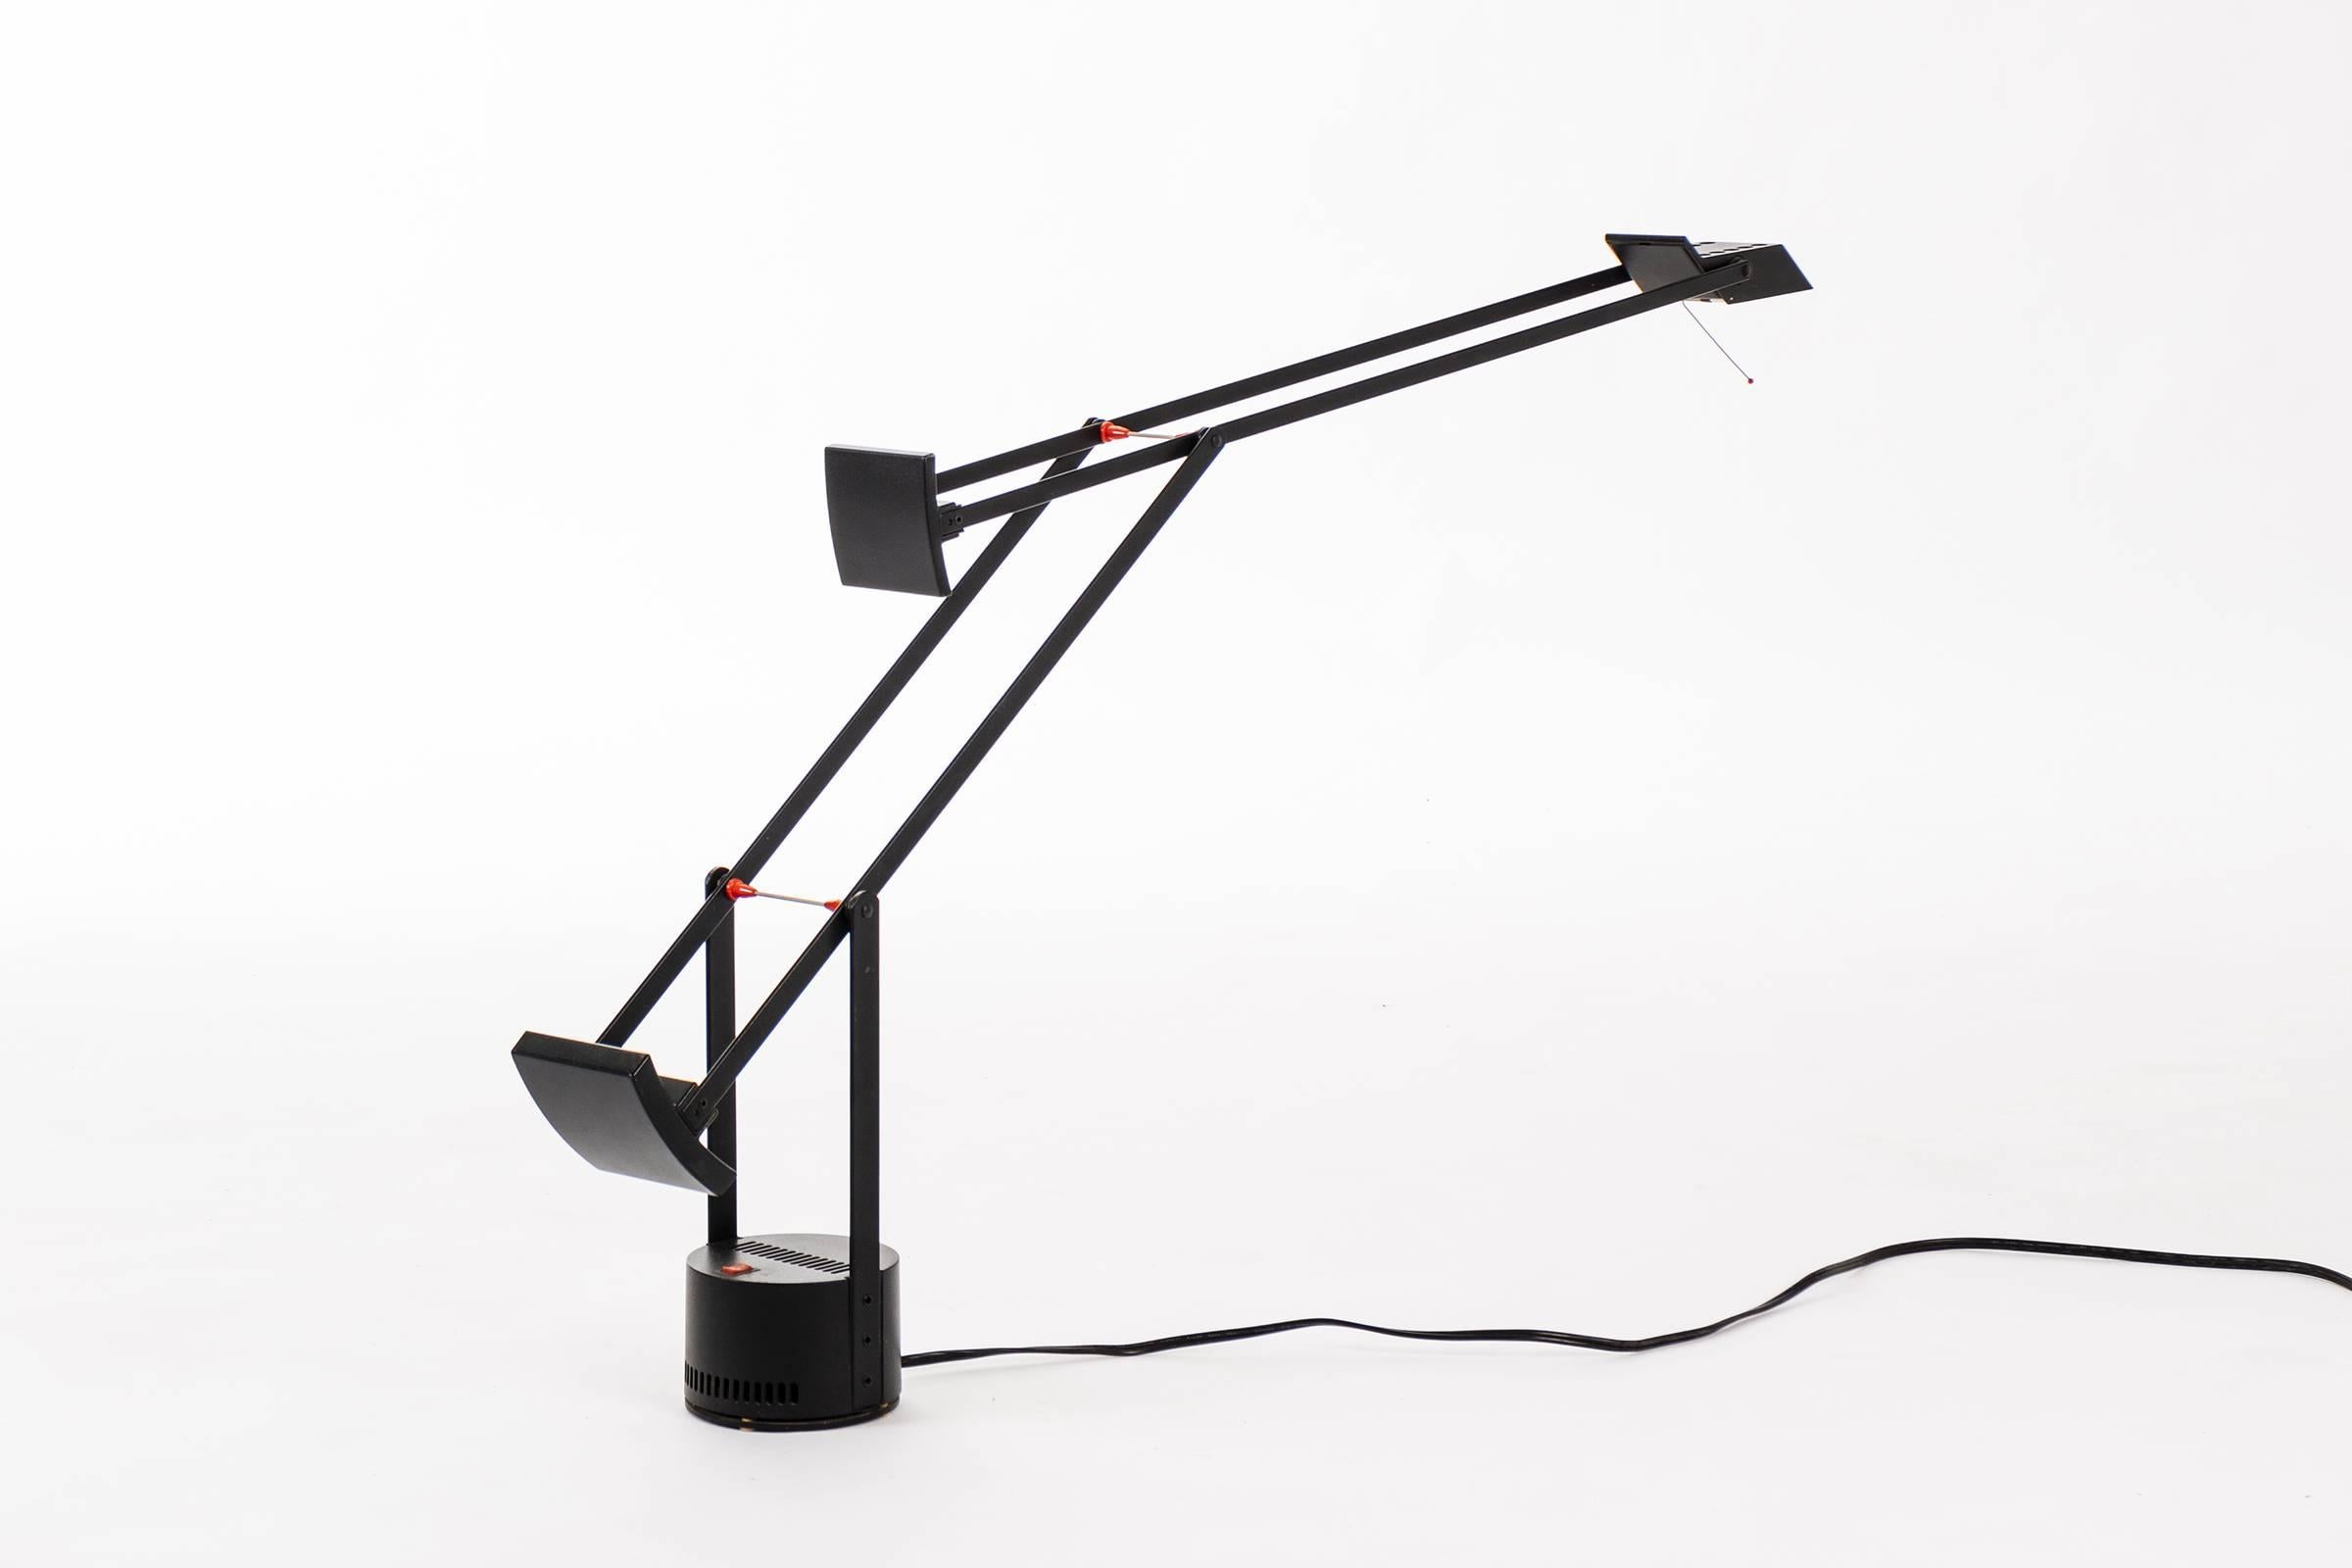 Tizio desk lamp for Artemide. Metal body with two counterweighted arms for easy configuration. Halogen bulb.